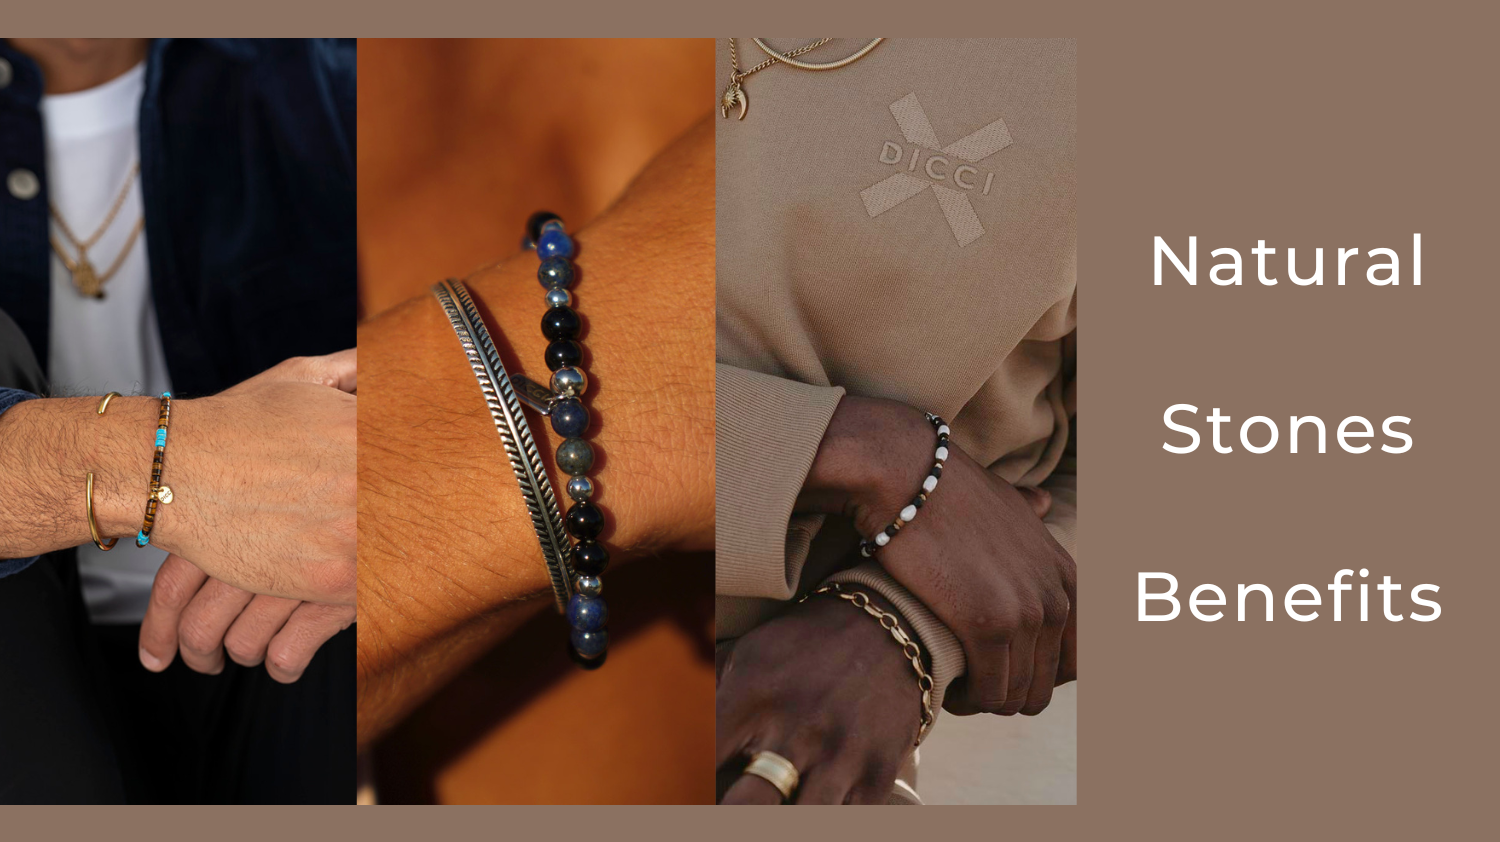 The Benefits of Wearing Natural Stone Bracelets for Your Health and Well-being